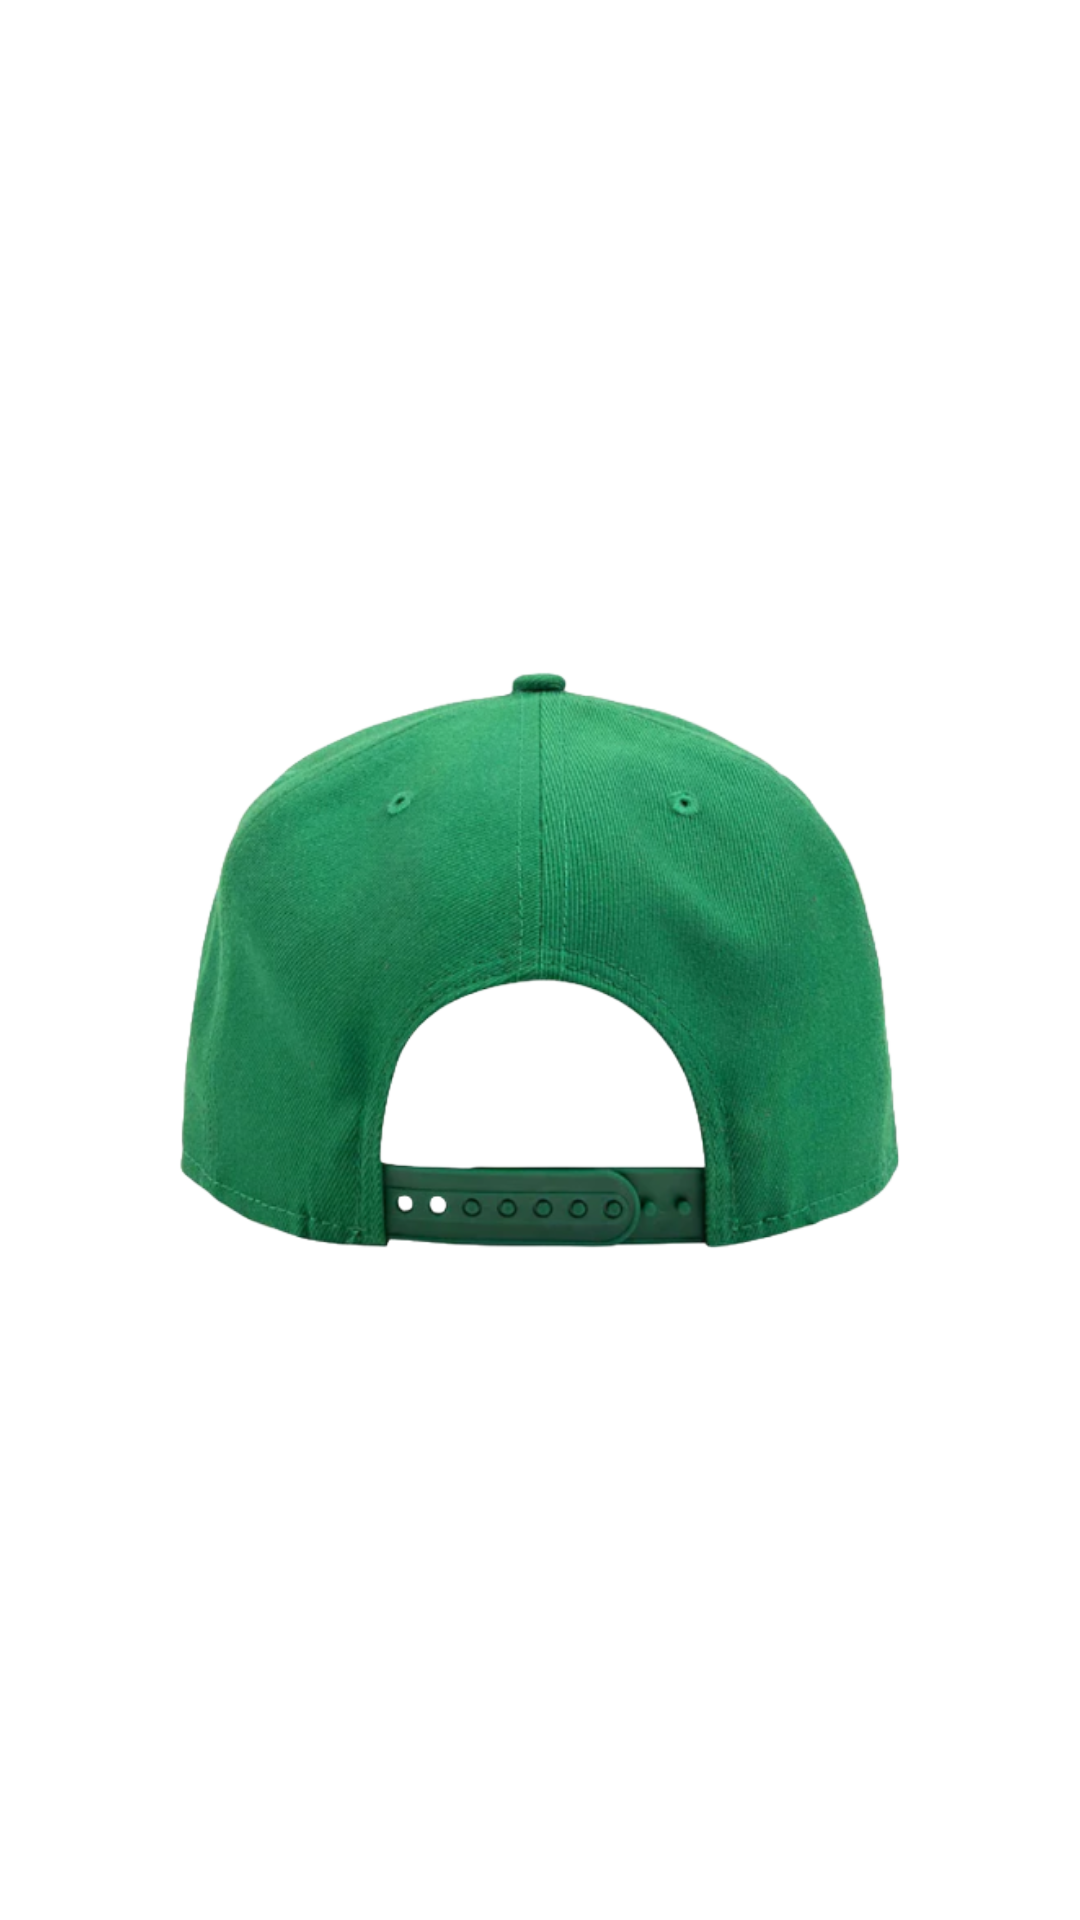 PAPER PLANES KELLY GREEN CROWN 9FIFTY SNAPBACK HAT